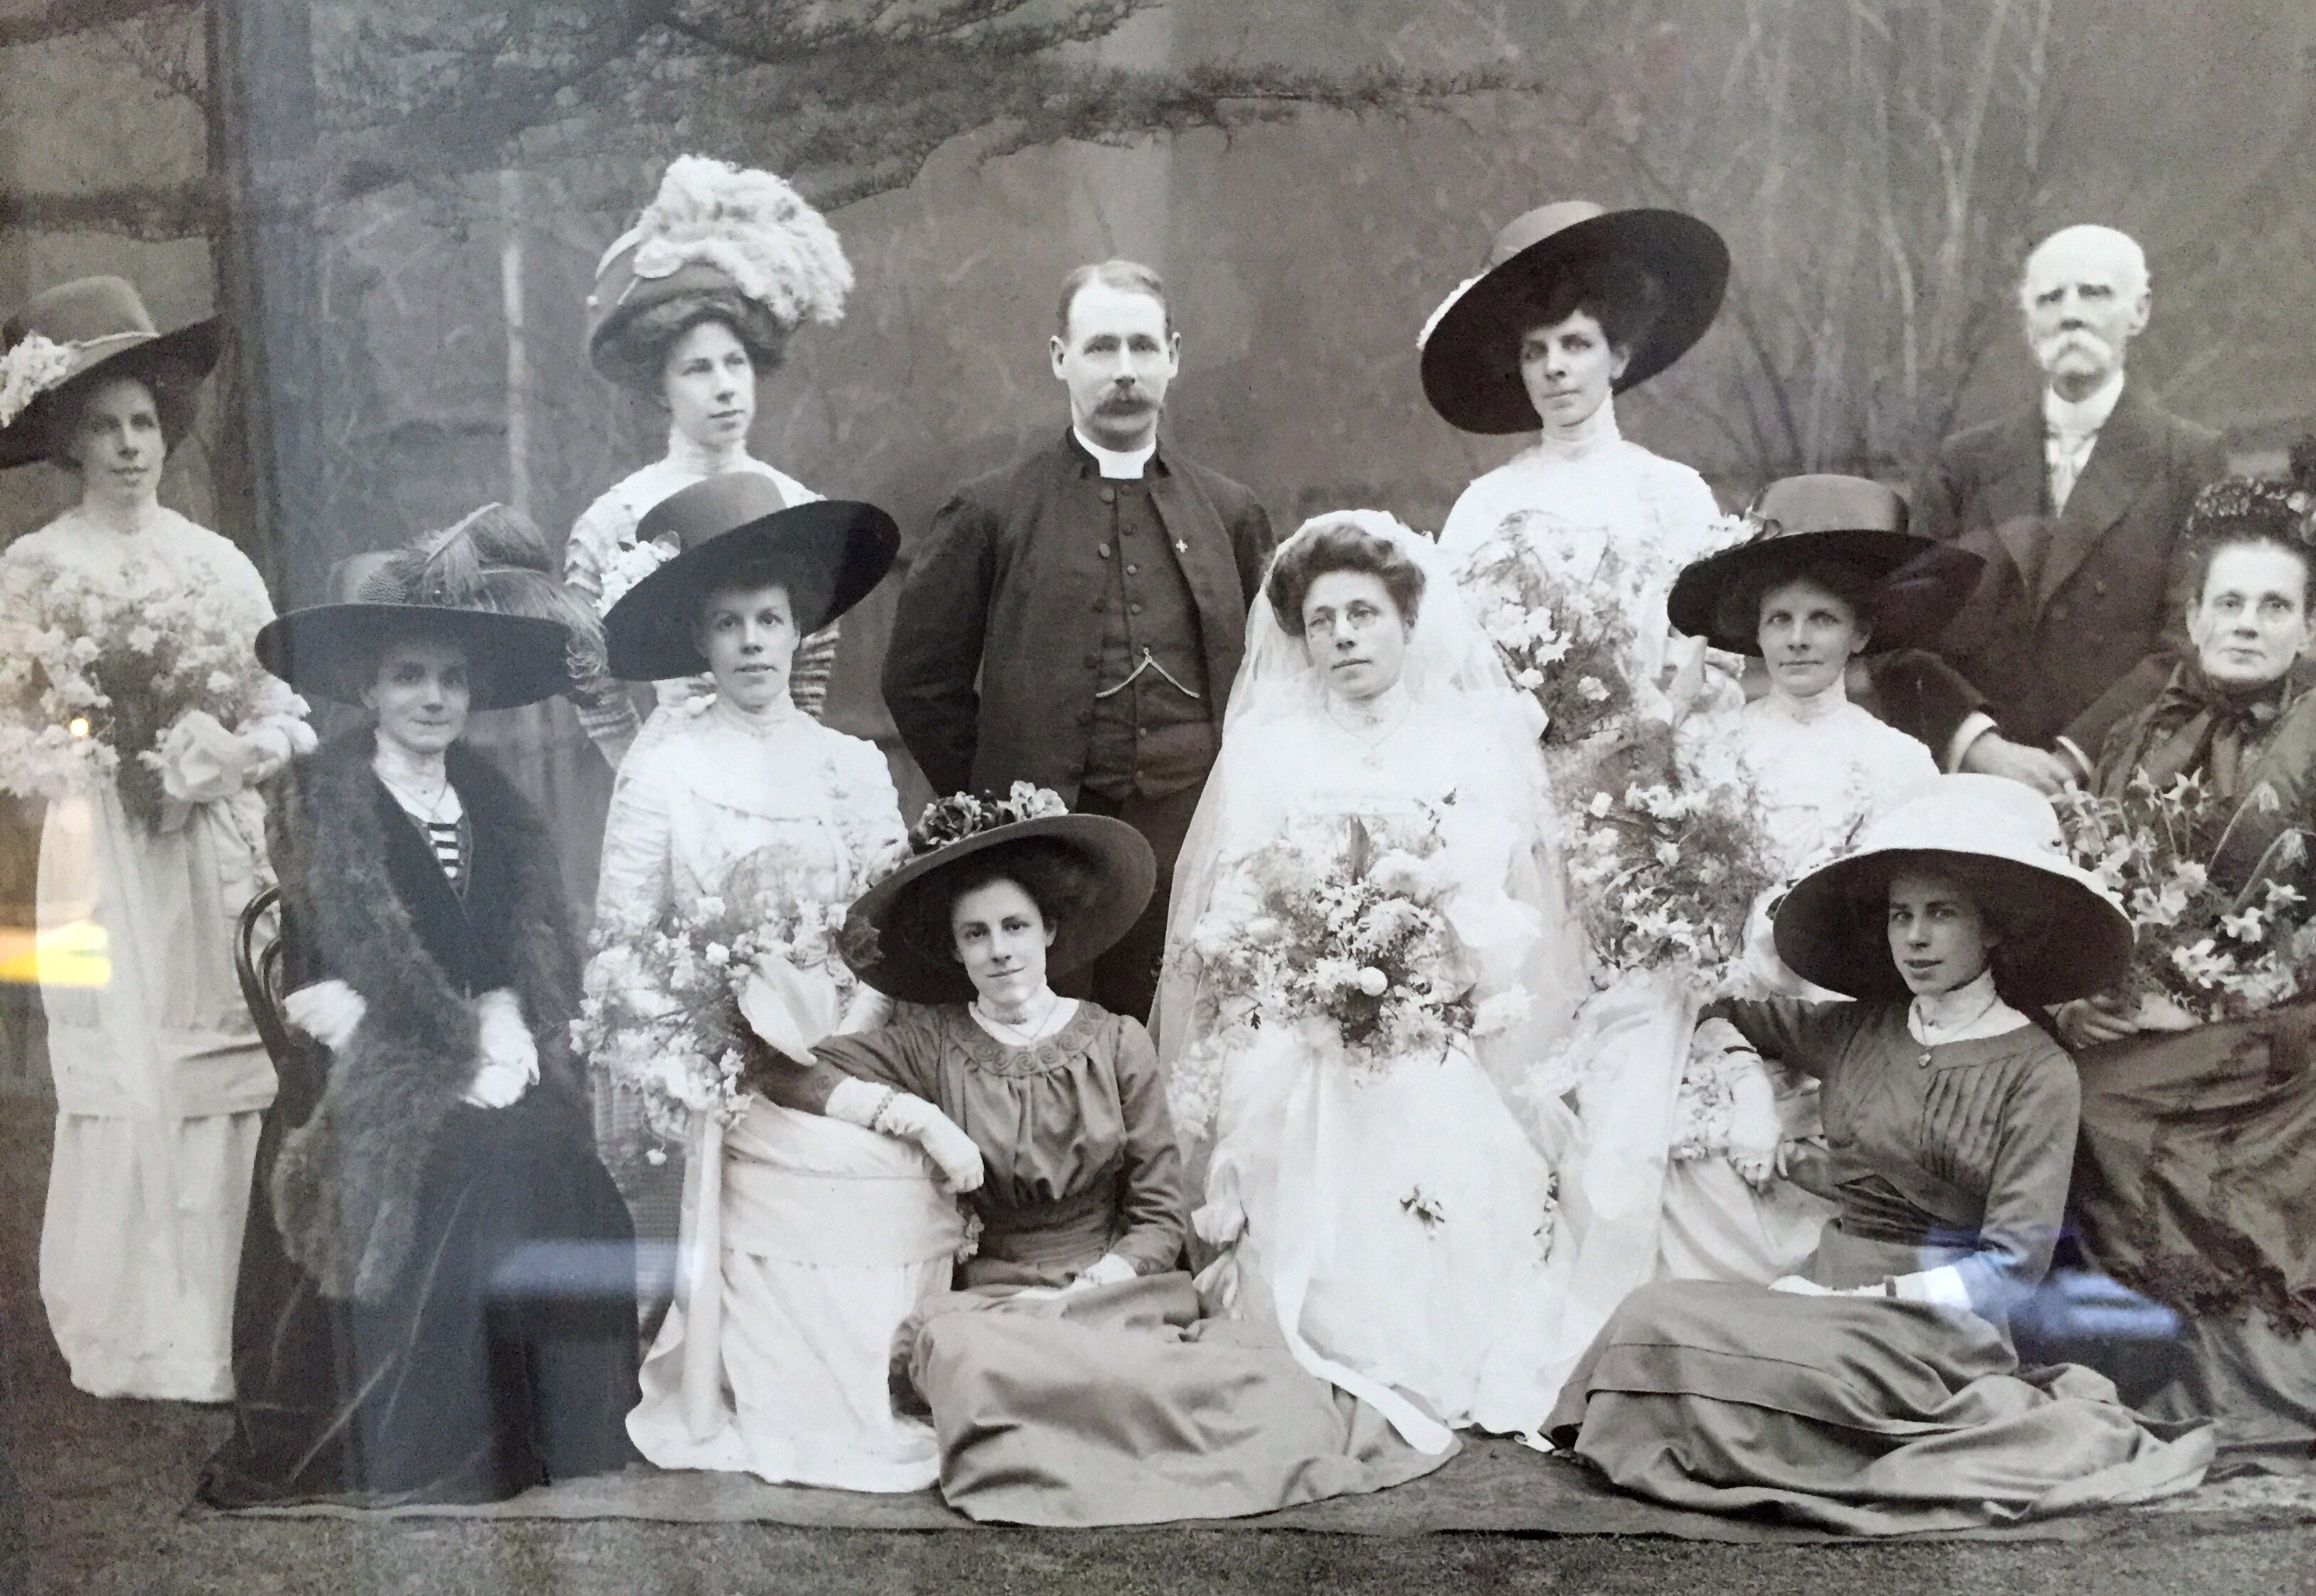 Belonged to my maternal grandfather Neville Egerton Wright 1870-1950 
Do not not know who these people are nor date/location of photo. Photographer is Norton Collins. 
